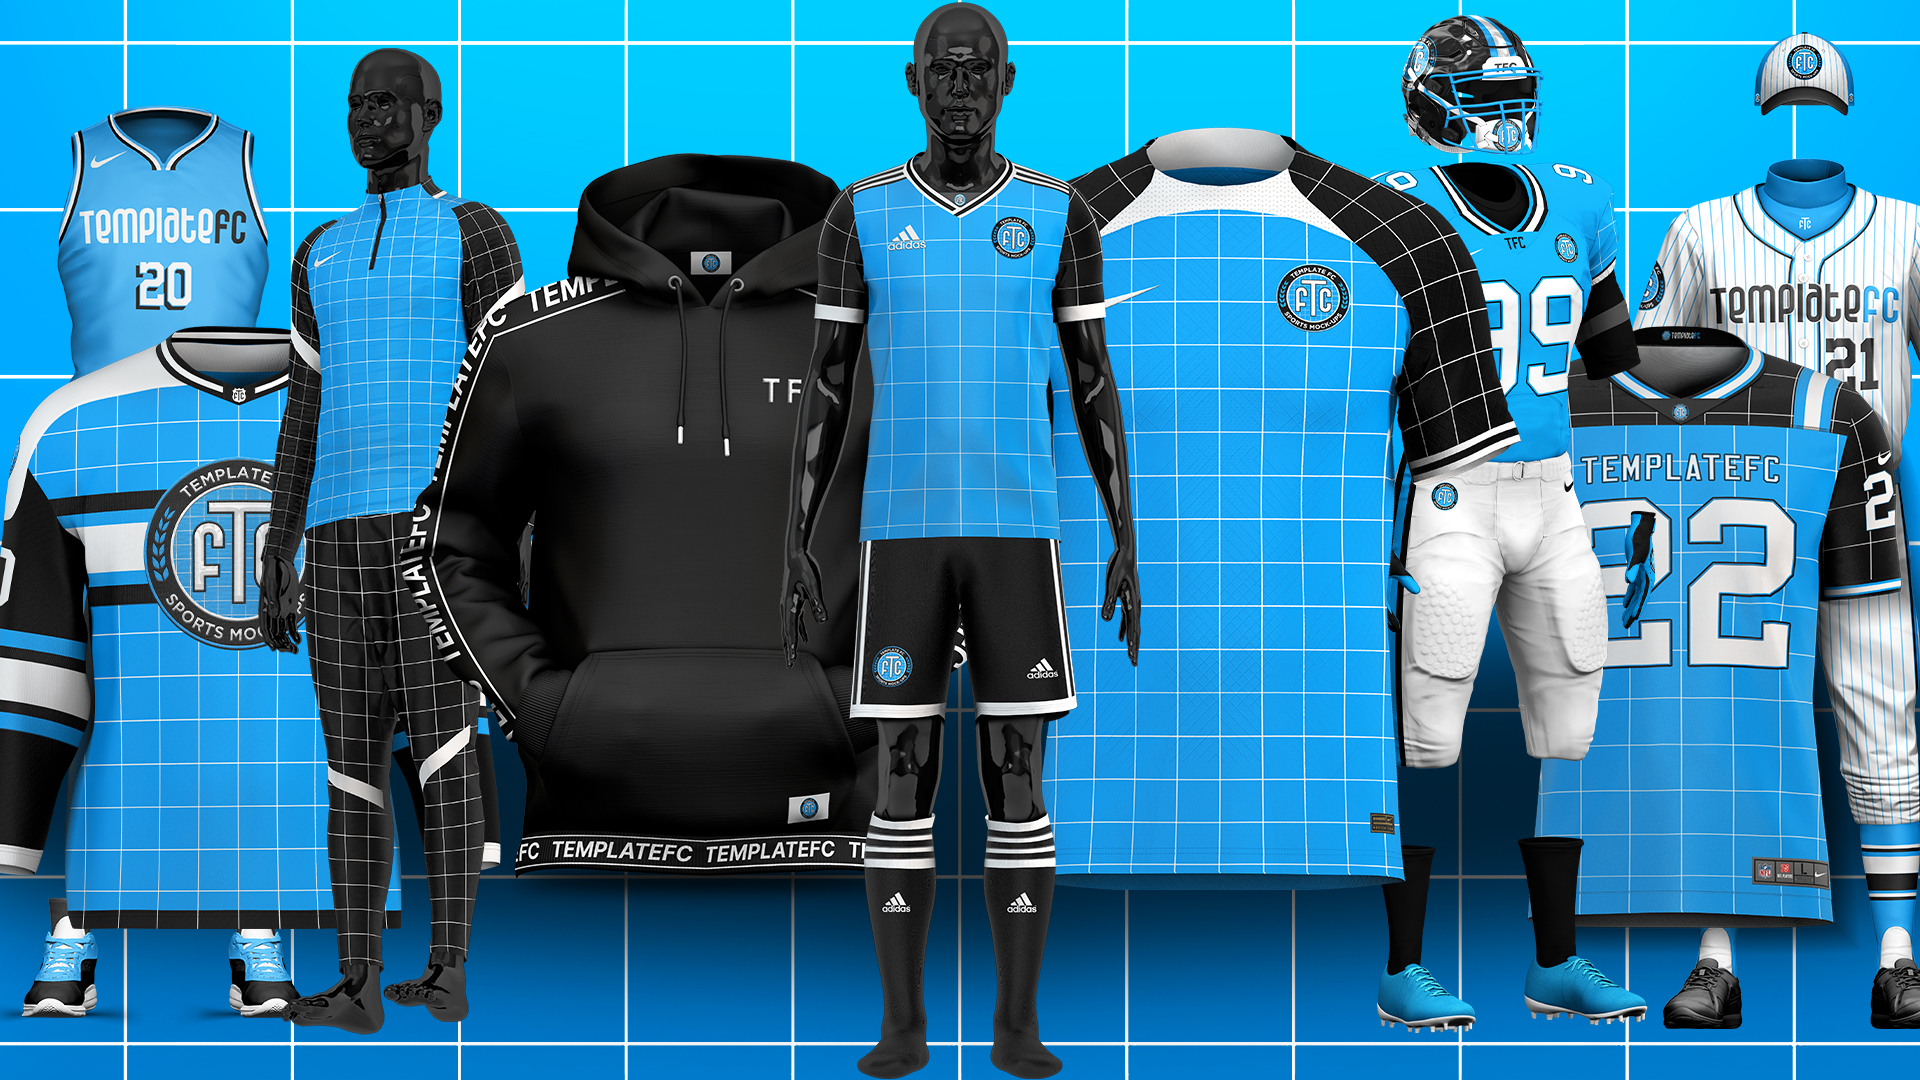 Home of the Best Sports Mock-up Templates & Patterns - TemplateFC